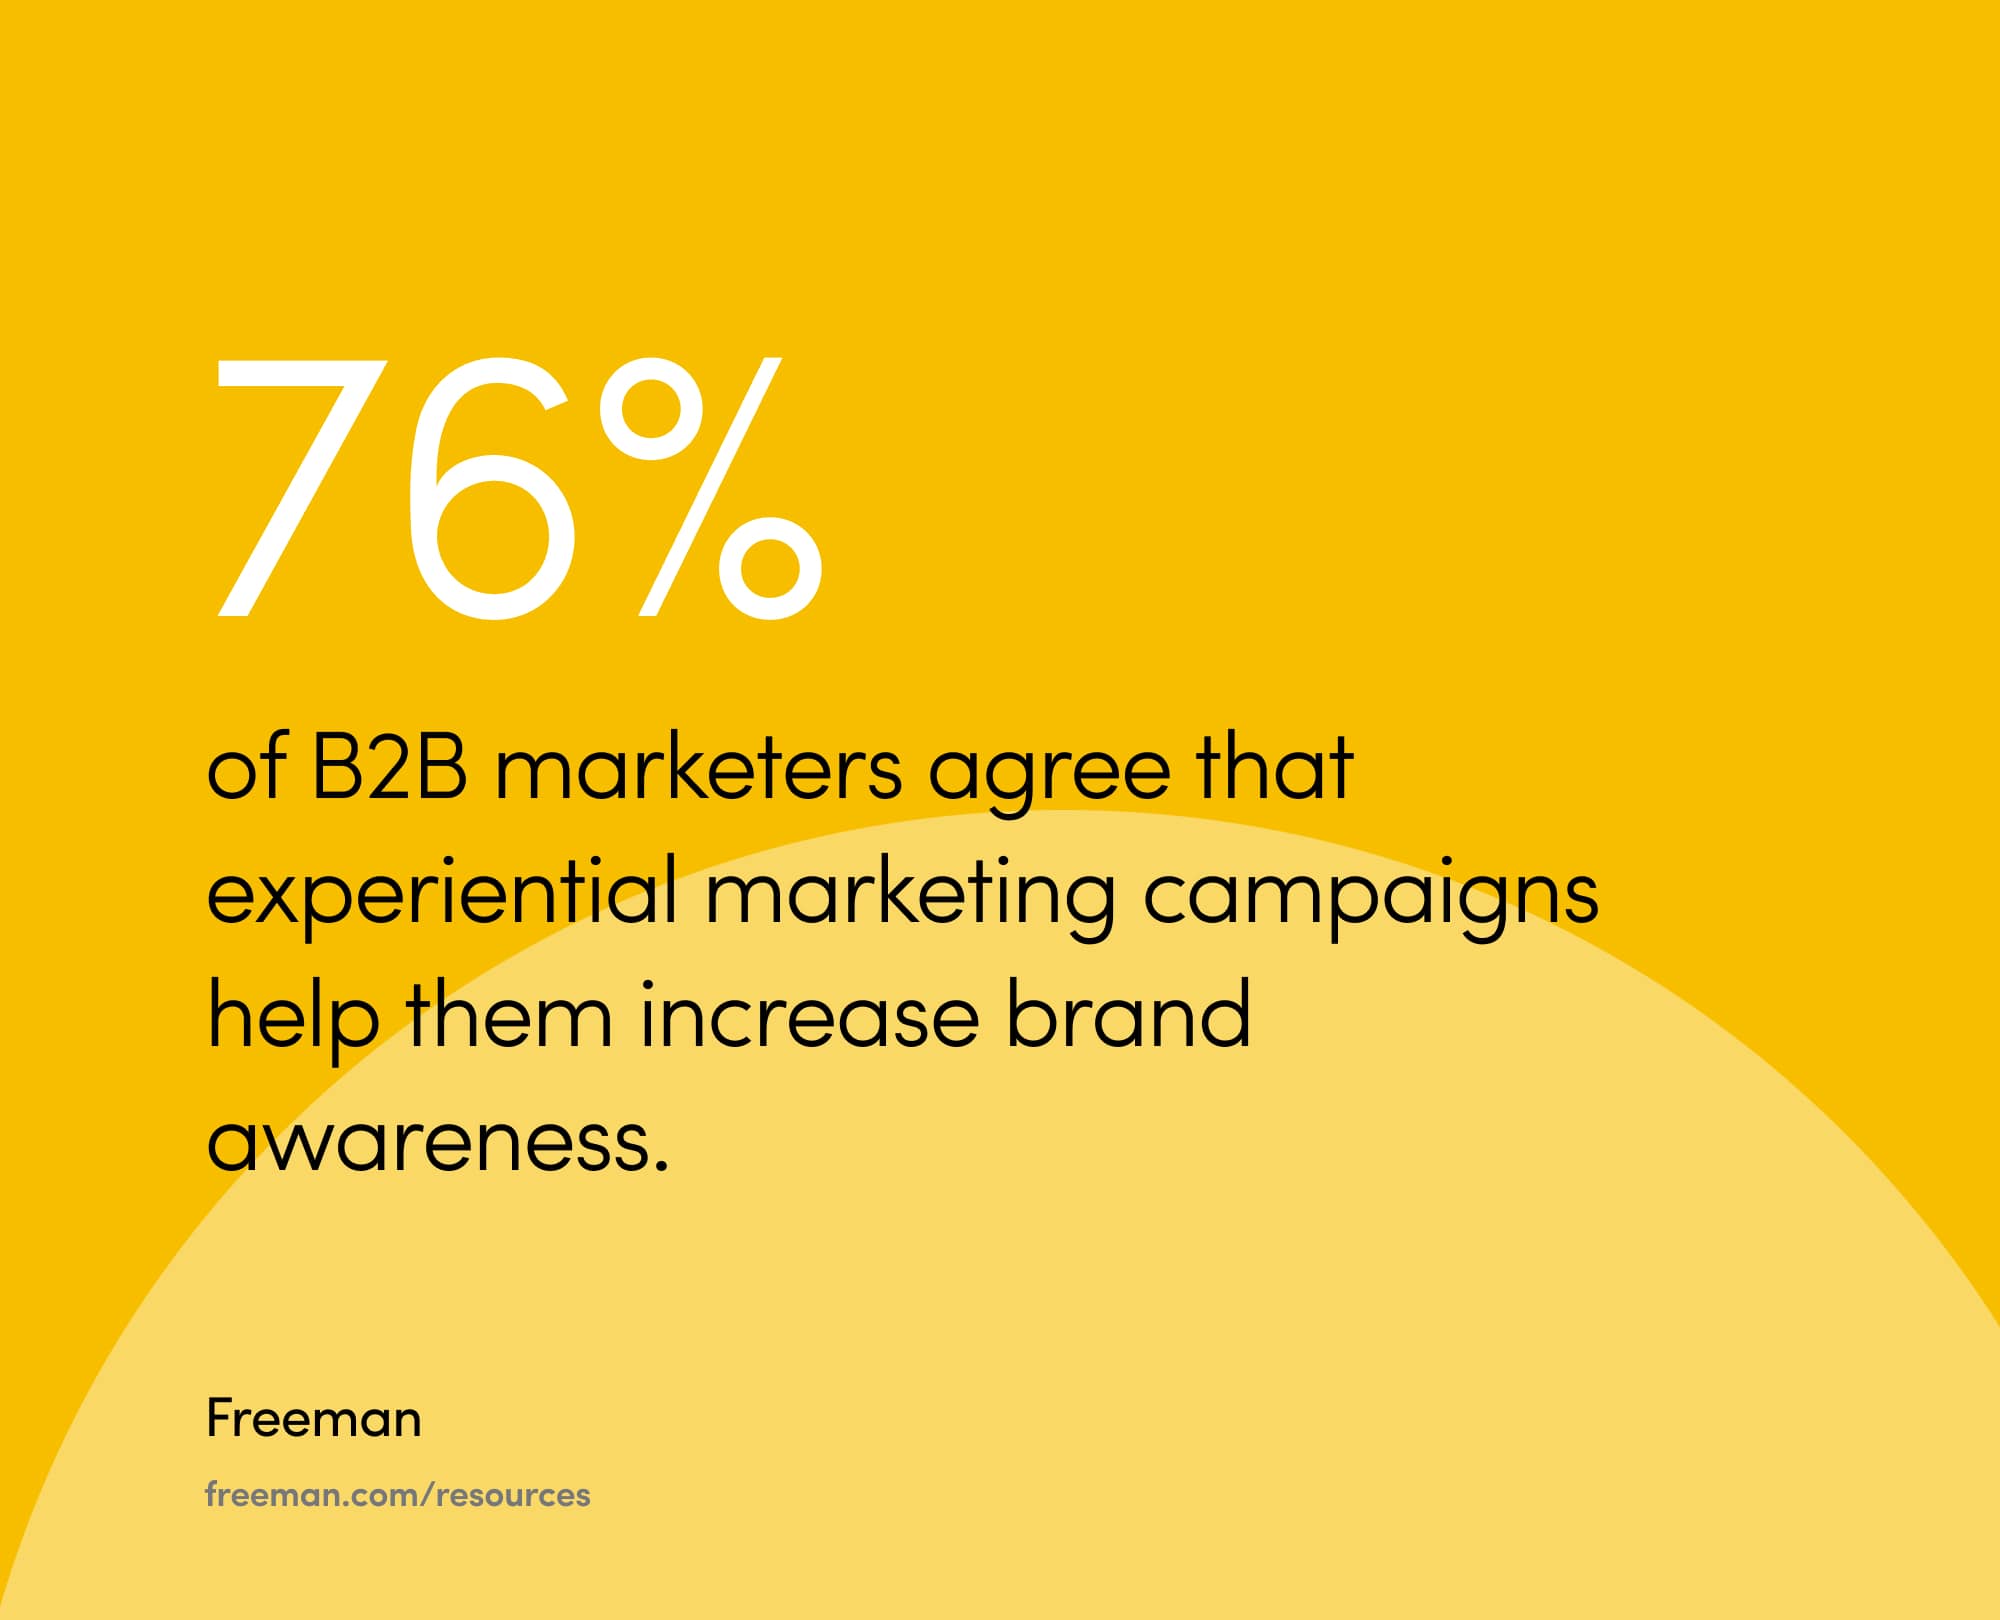 Activated statistic - A recent Freeman report noted that 76% of B2B marketers agree that experiential marketing campaigns help them increase brand awareness.